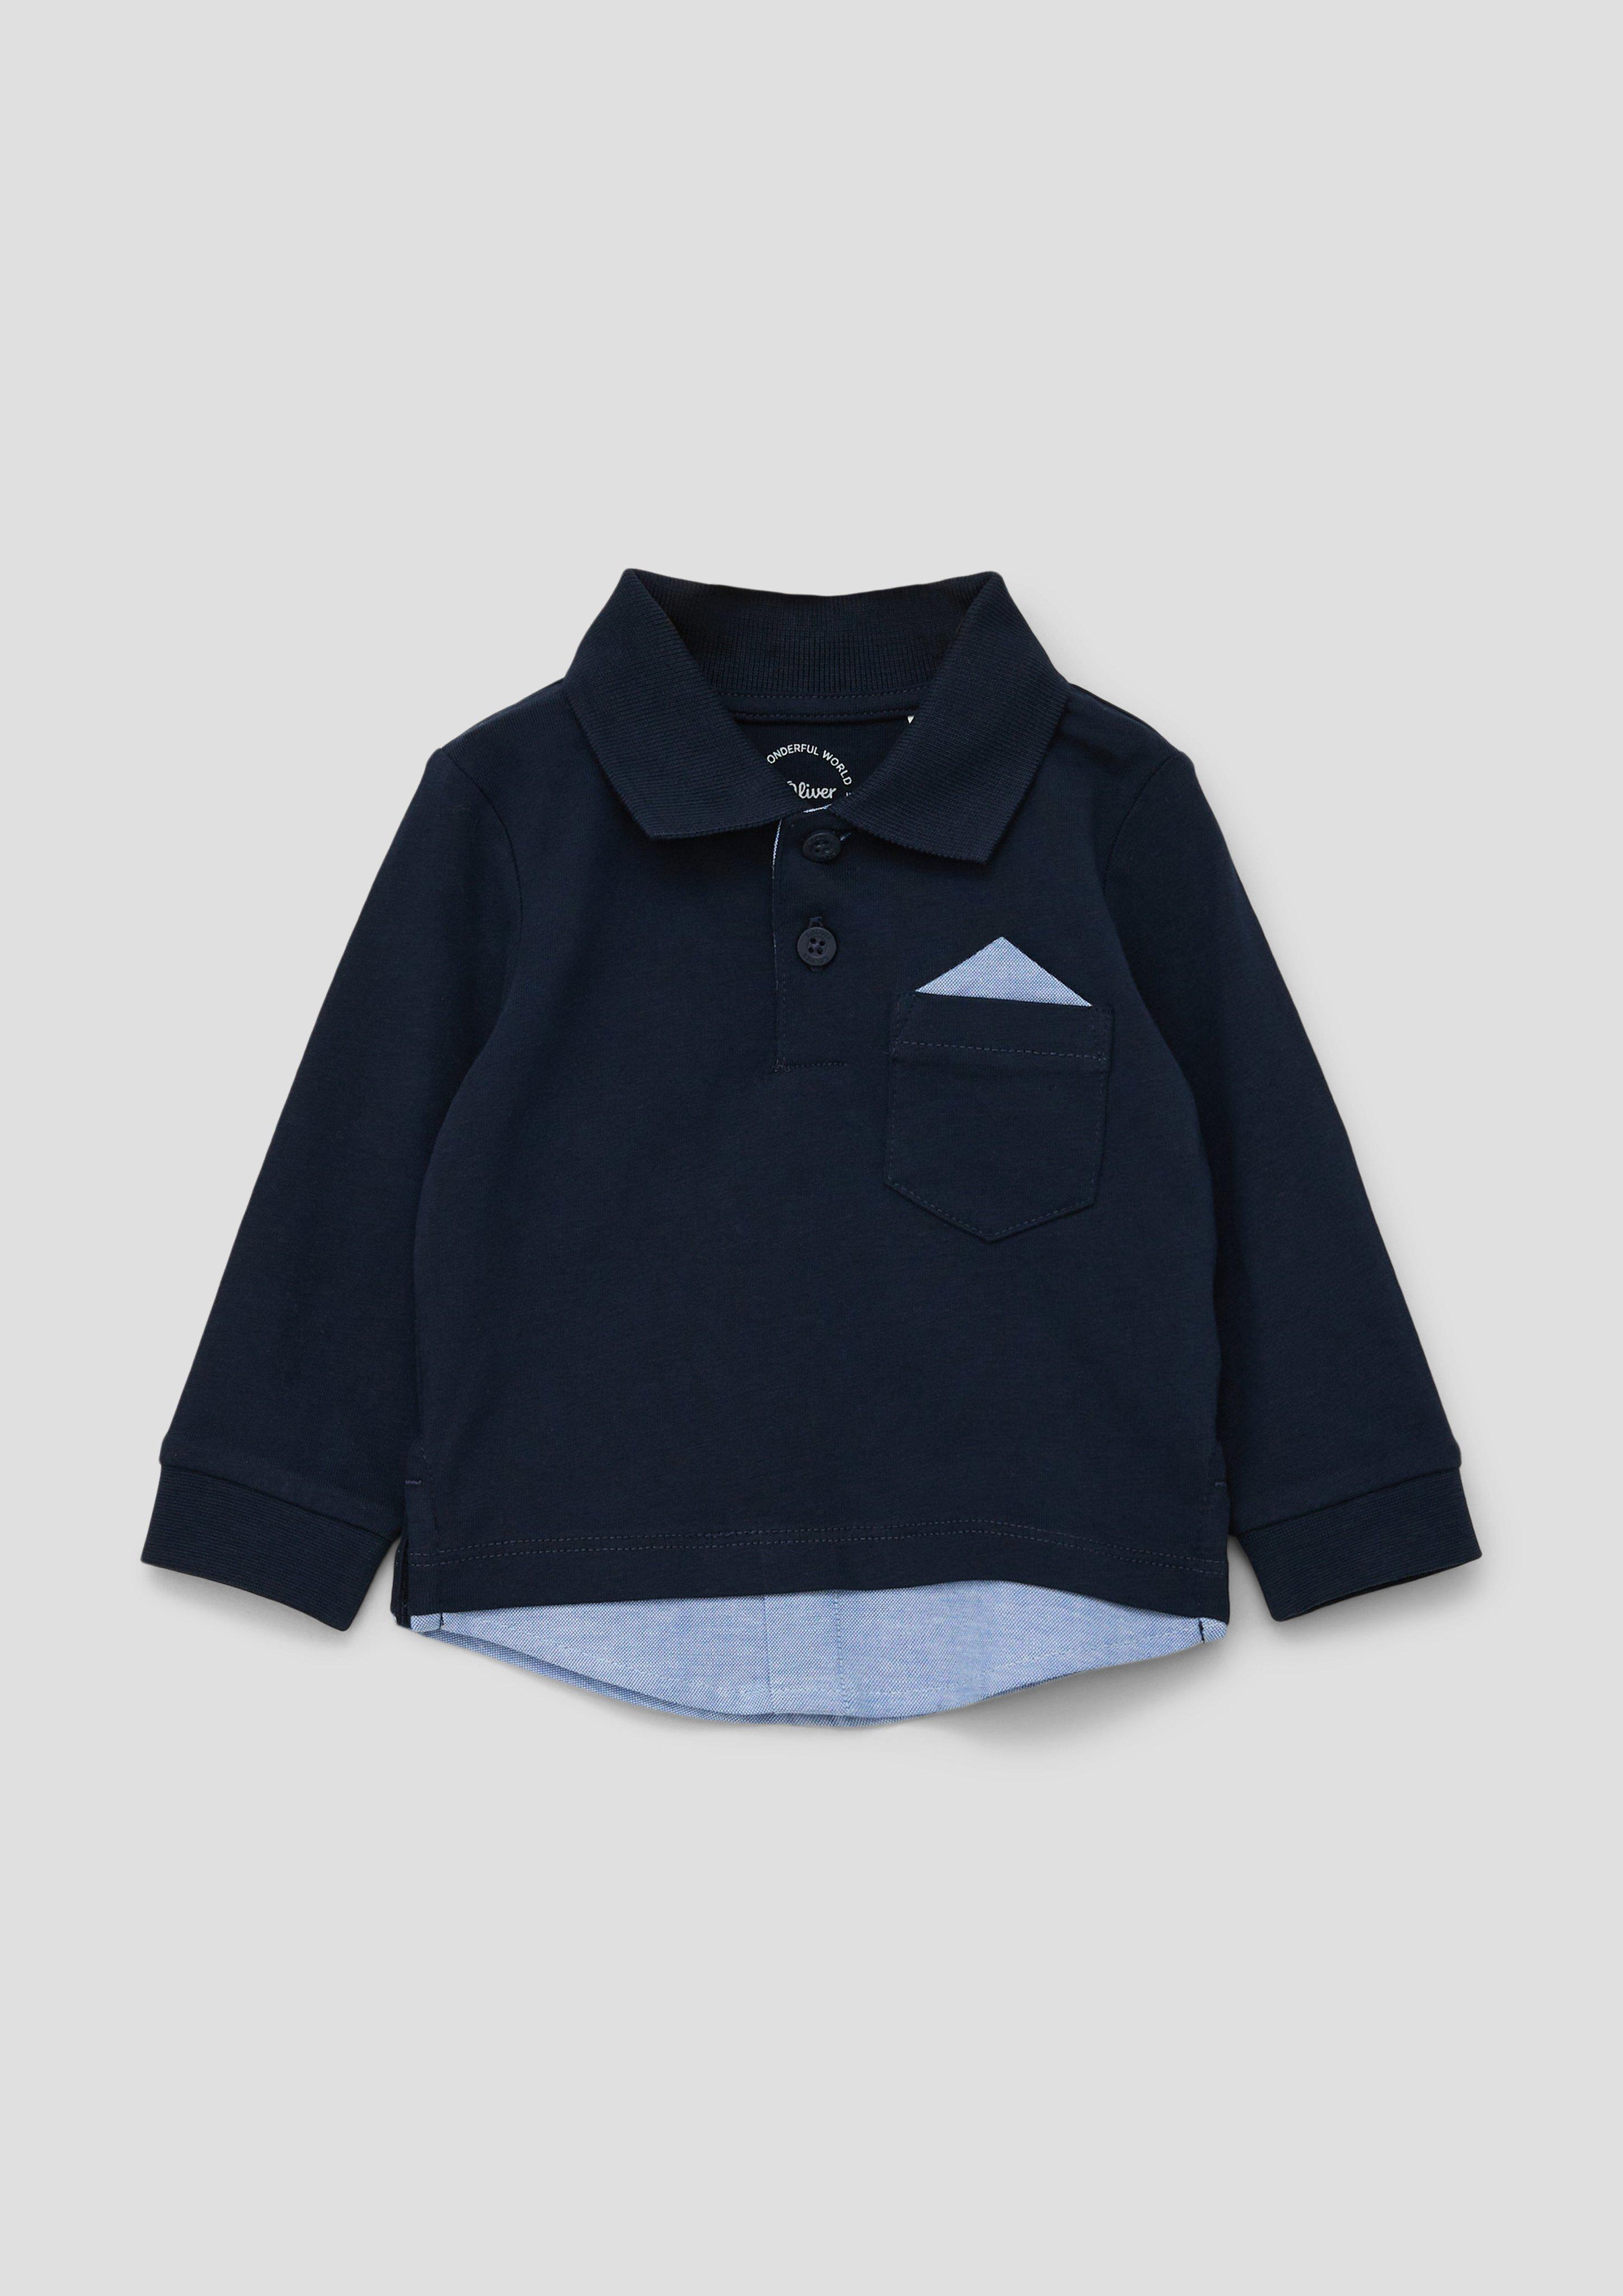 Polo shirt in layered look a - navy